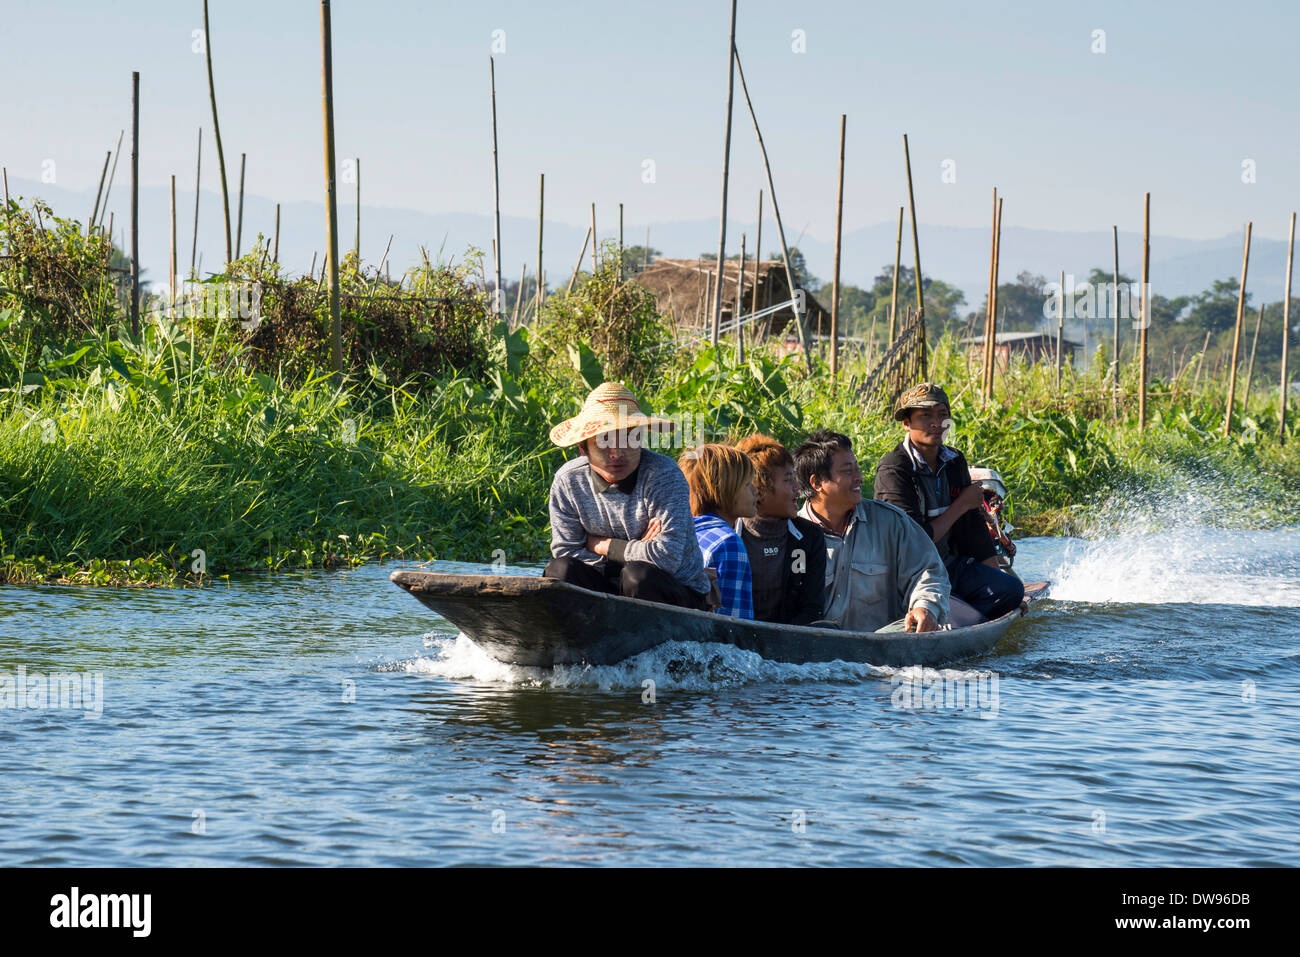 People in a canoe, floating garden, field on the water, Inle Lake, Shan State, Myanmar Stock Photo